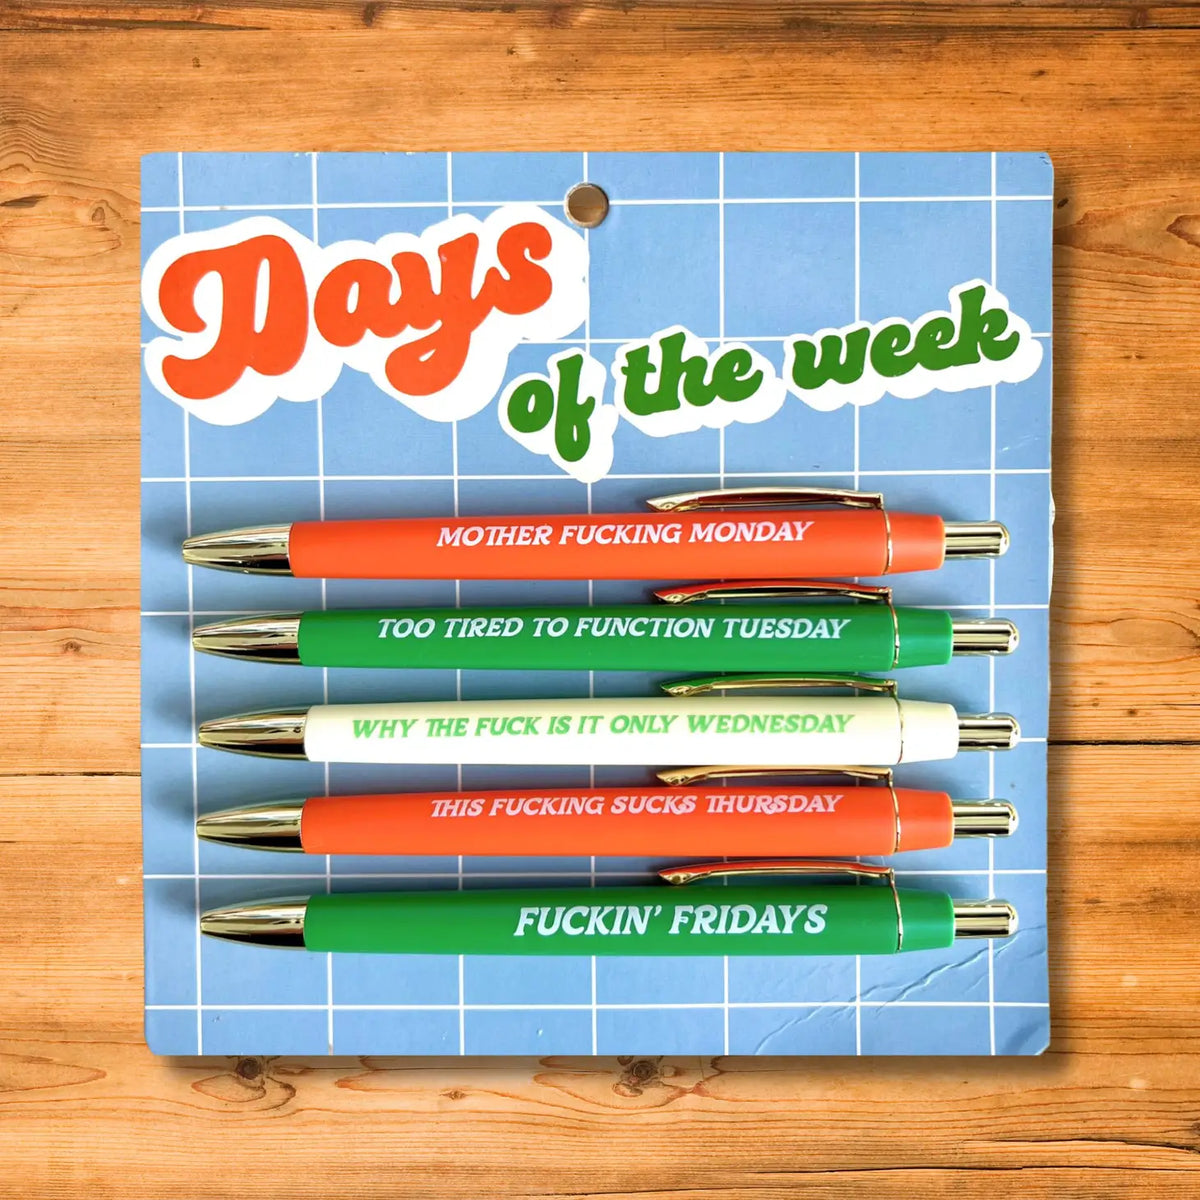 Days Of The Week Pen Set – Calliope Paperie